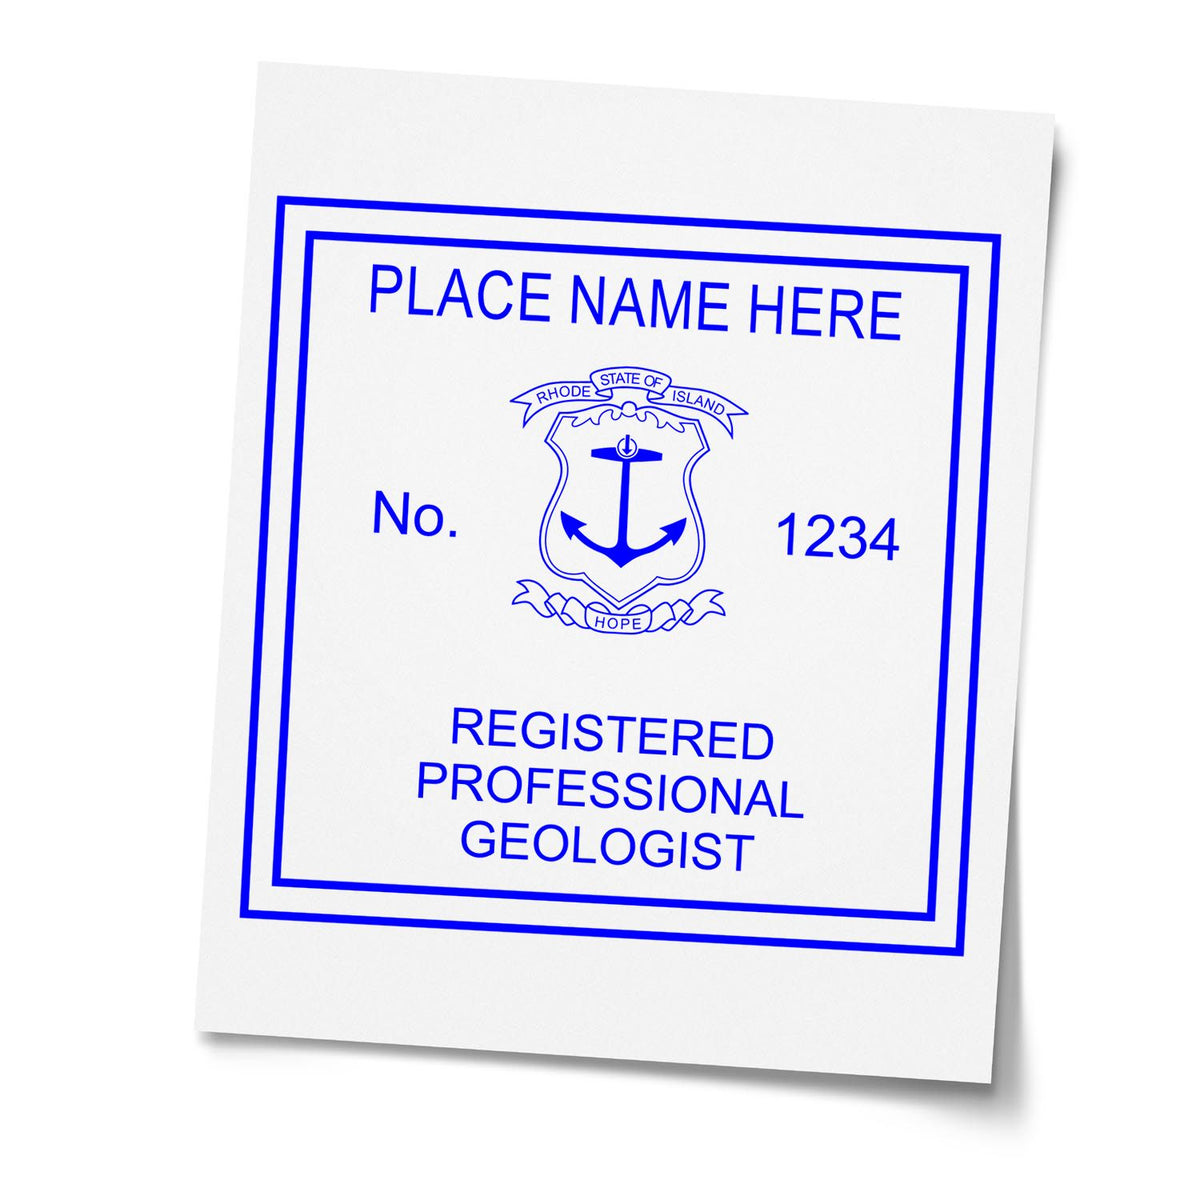 A lifestyle photo showing a stamped image of the Digital Rhode Island Geologist Stamp, Electronic Seal for Rhode Island Geologist on a piece of paper